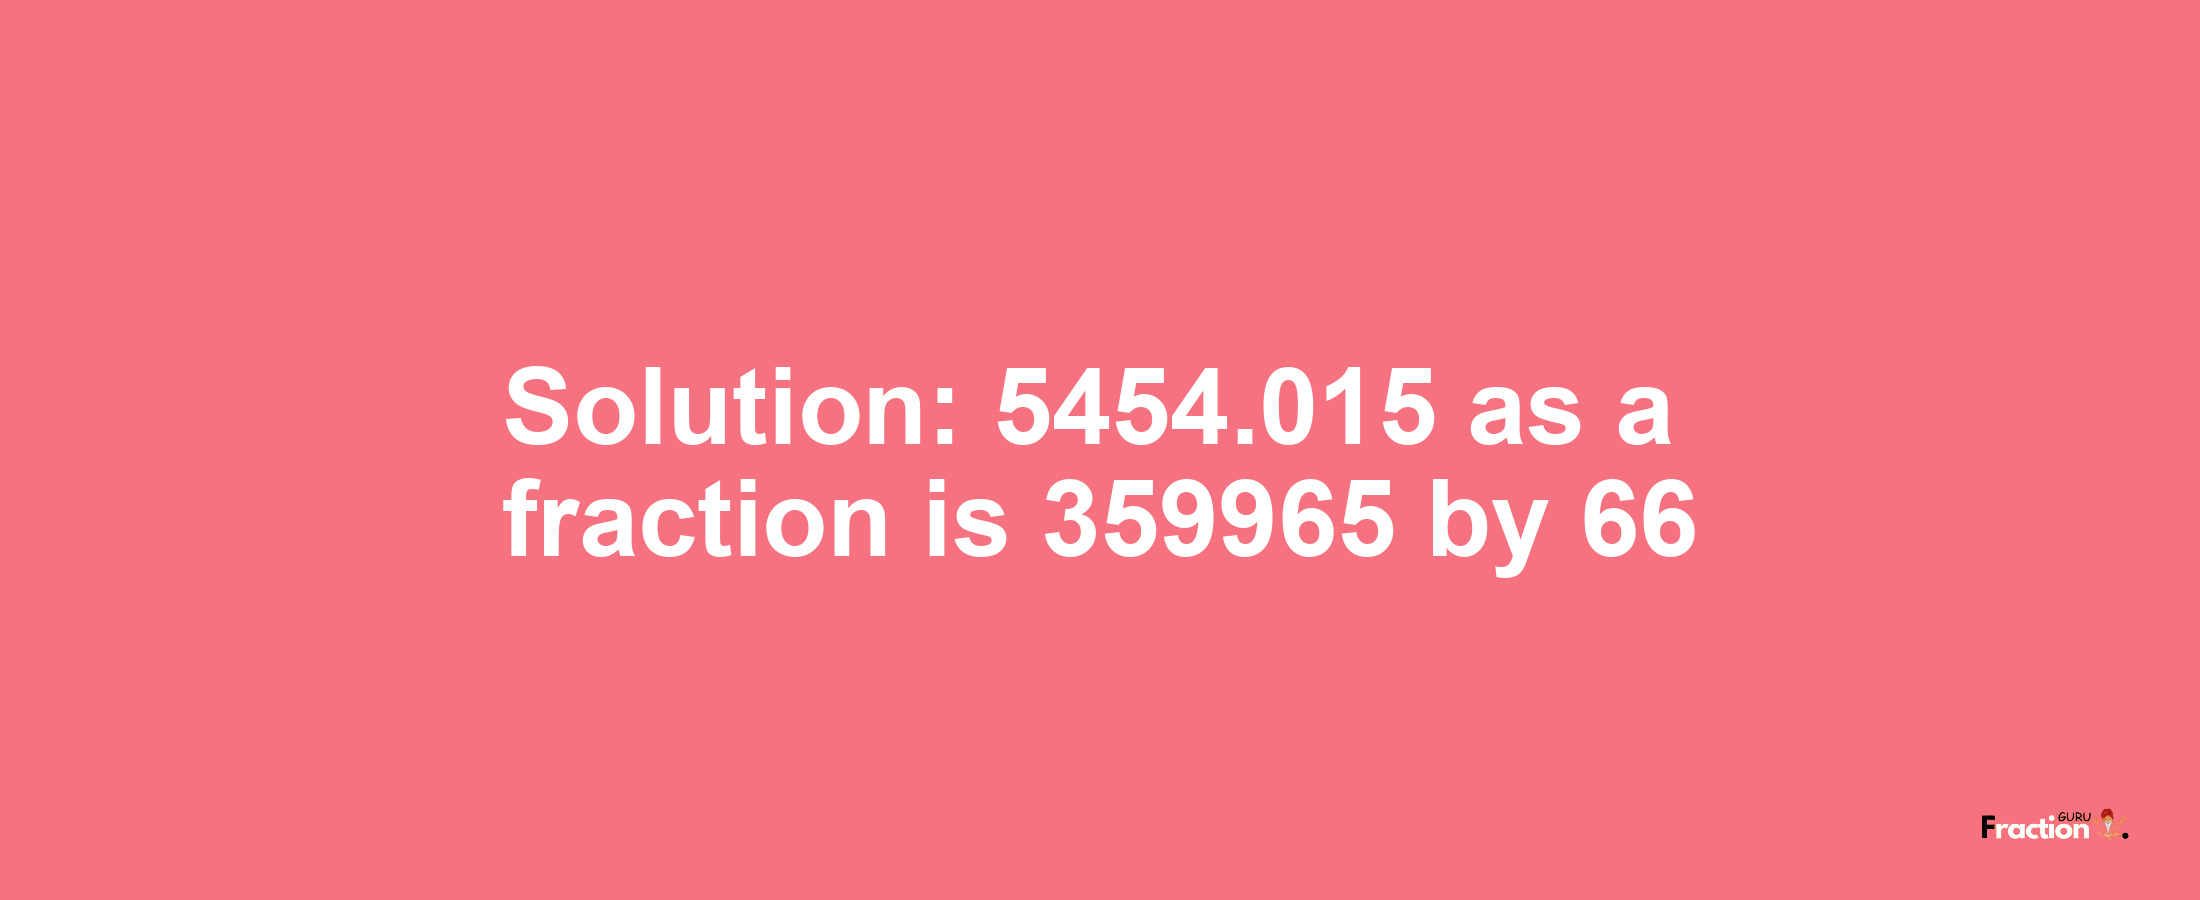 Solution:5454.015 as a fraction is 359965/66